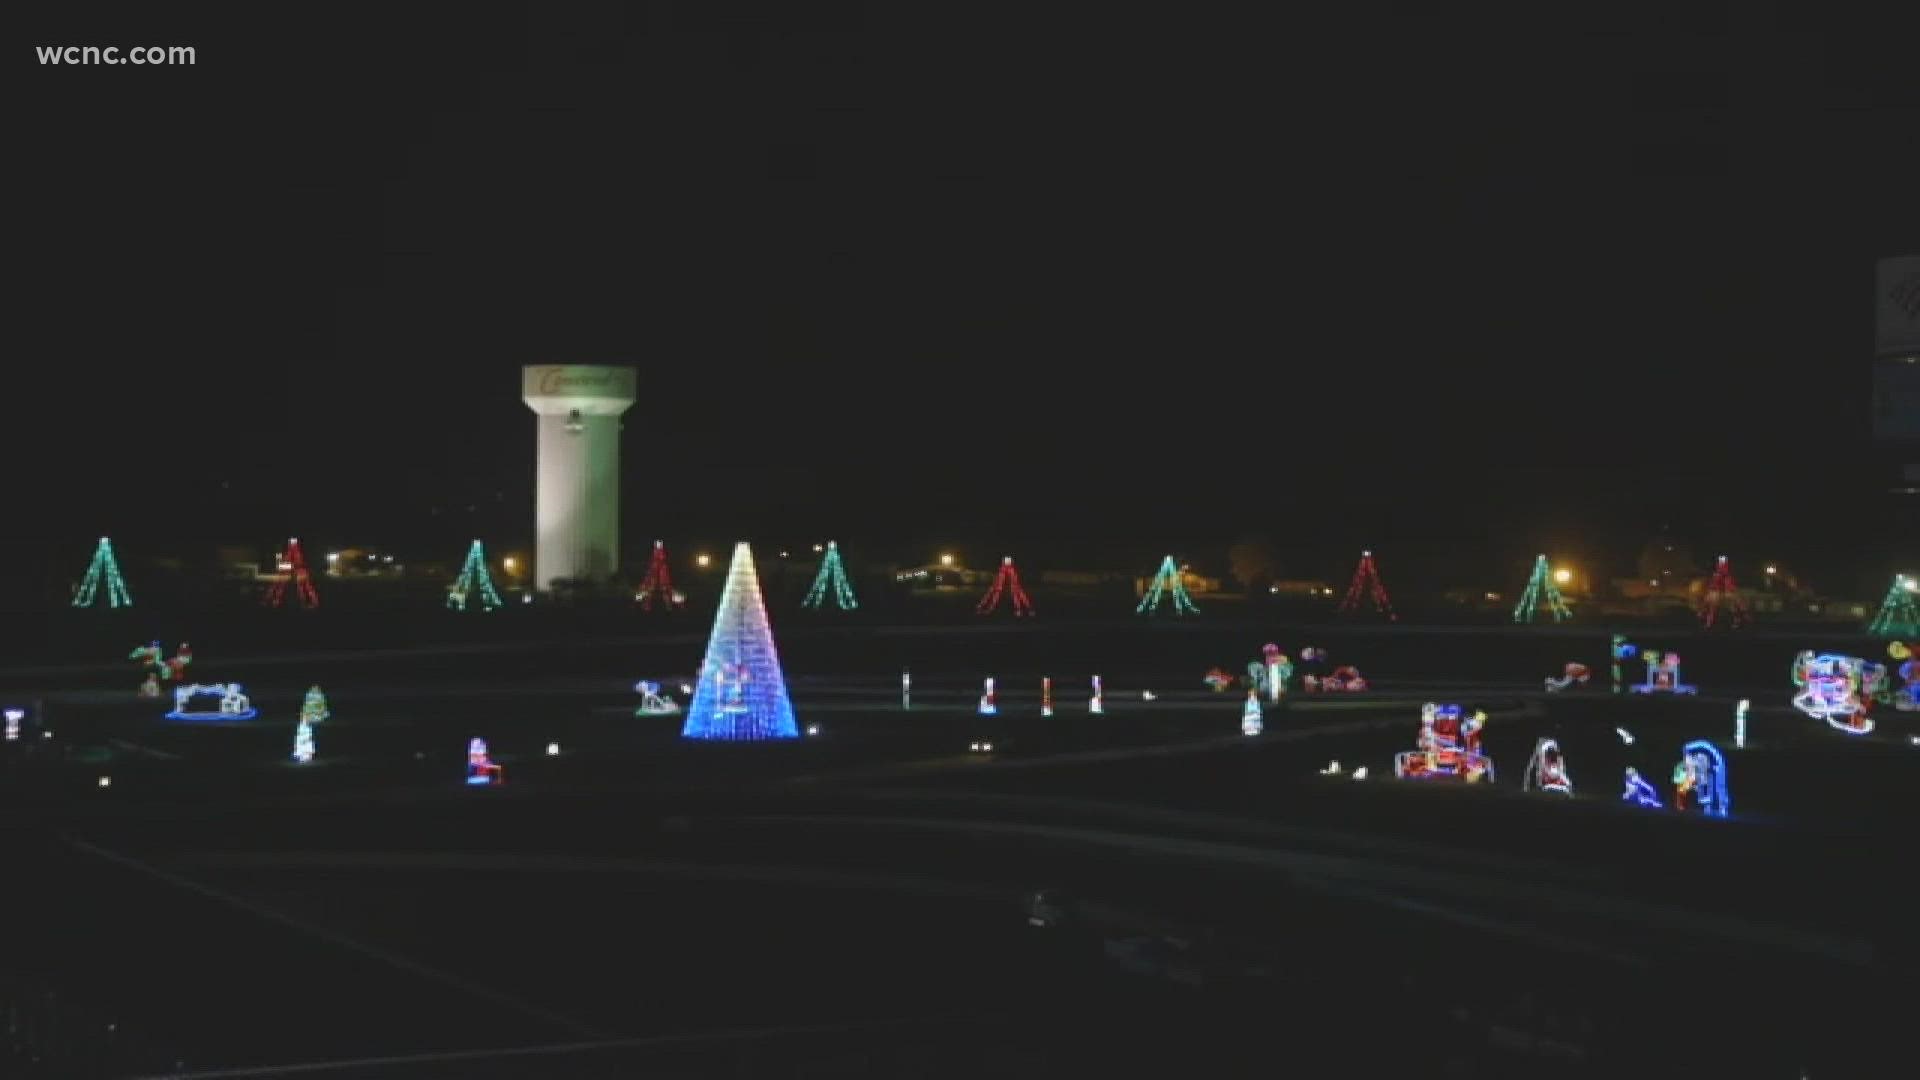 Speedway Christmas features 4 million lights, more than 800 individual displays, music, movies, s'mores and more.